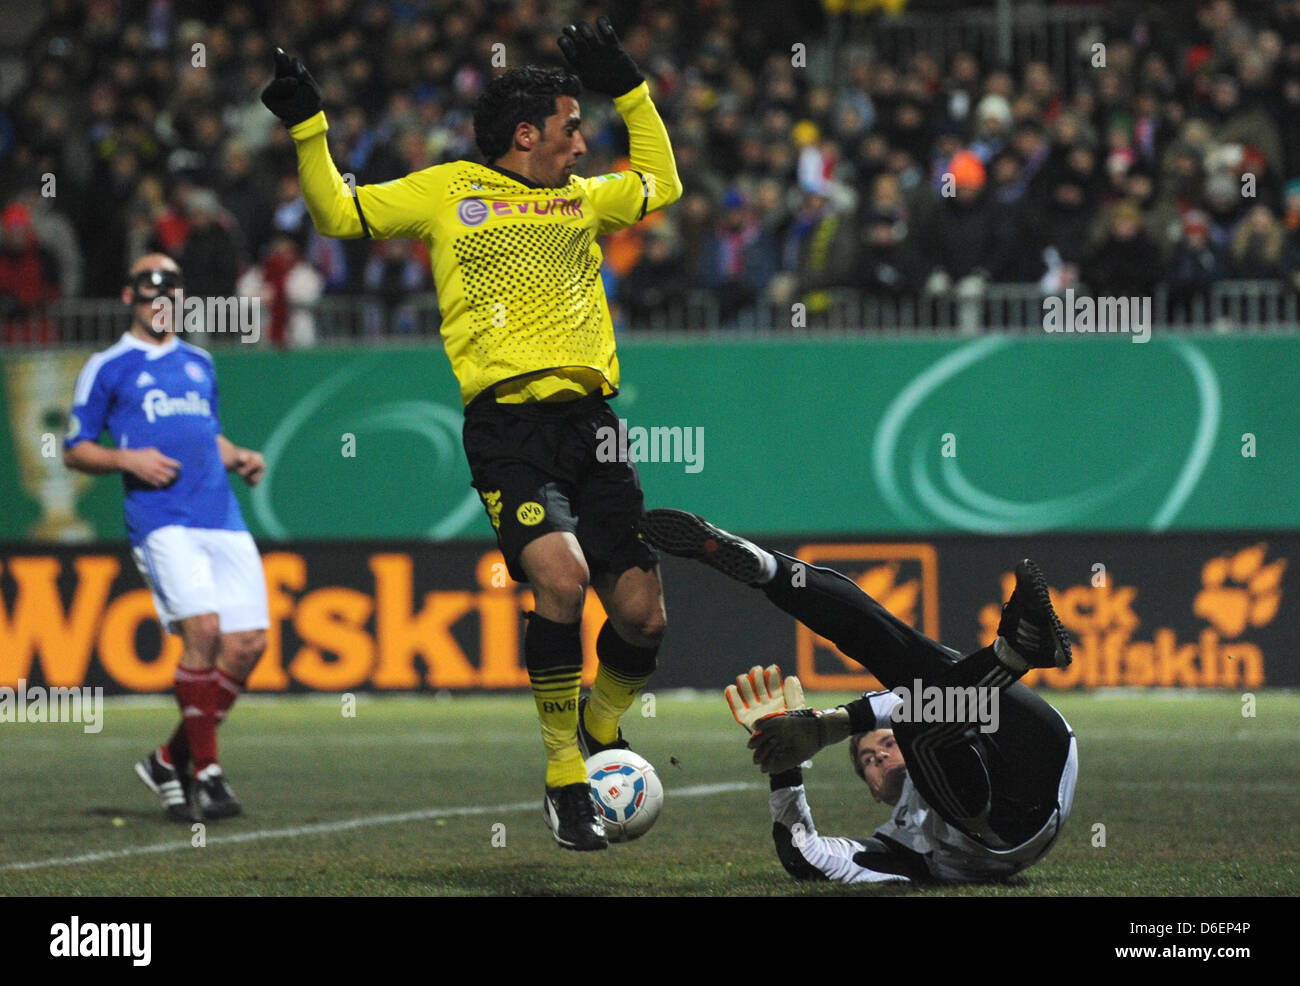 Kiel's goal keeper Morten Jensen (R) and Dortmund's Lucas Barrios fight for the ball during the DFB Cup soccer match between Holstein Kiel and Borussia Dortmund at the Holstein Stadium in kiel, Germany, 07 February 2012. Photo: Marcus Brandt Stock Photo